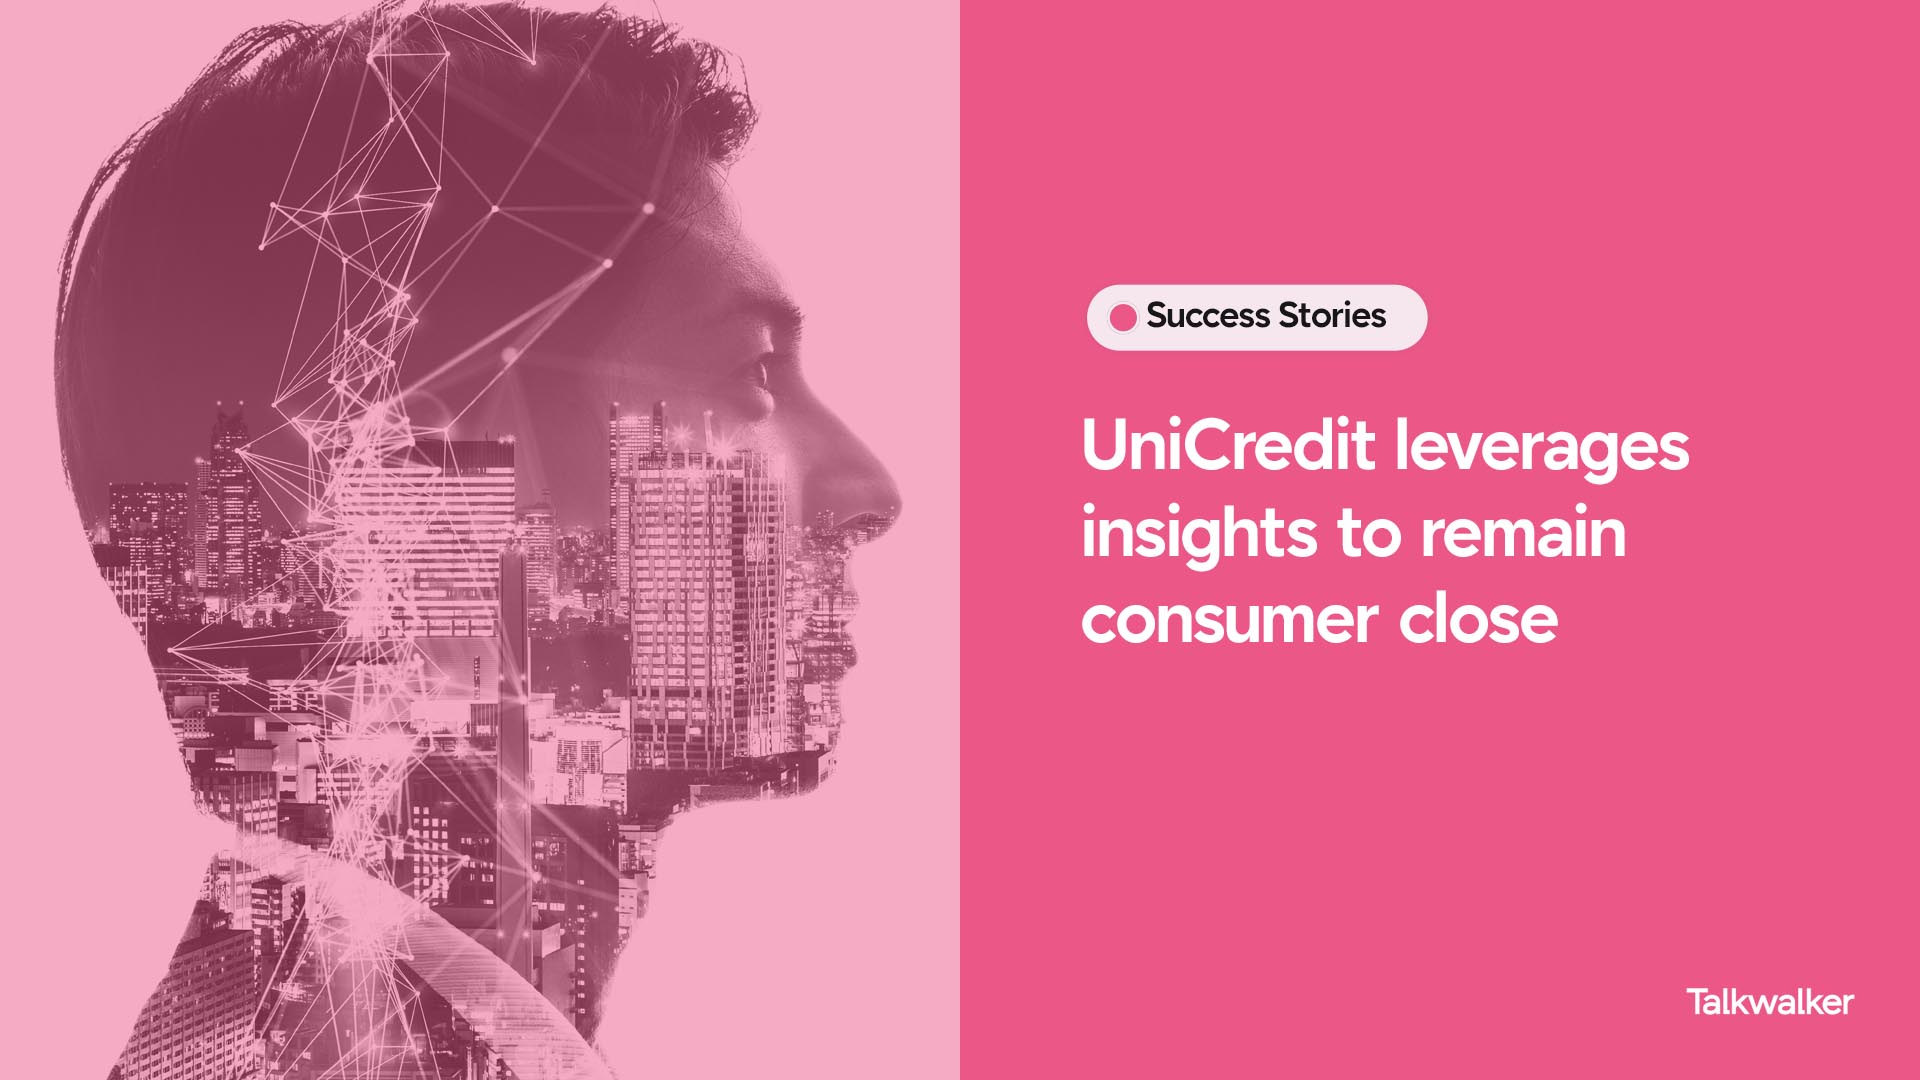 UniCredit leverages insights to remain consumer close